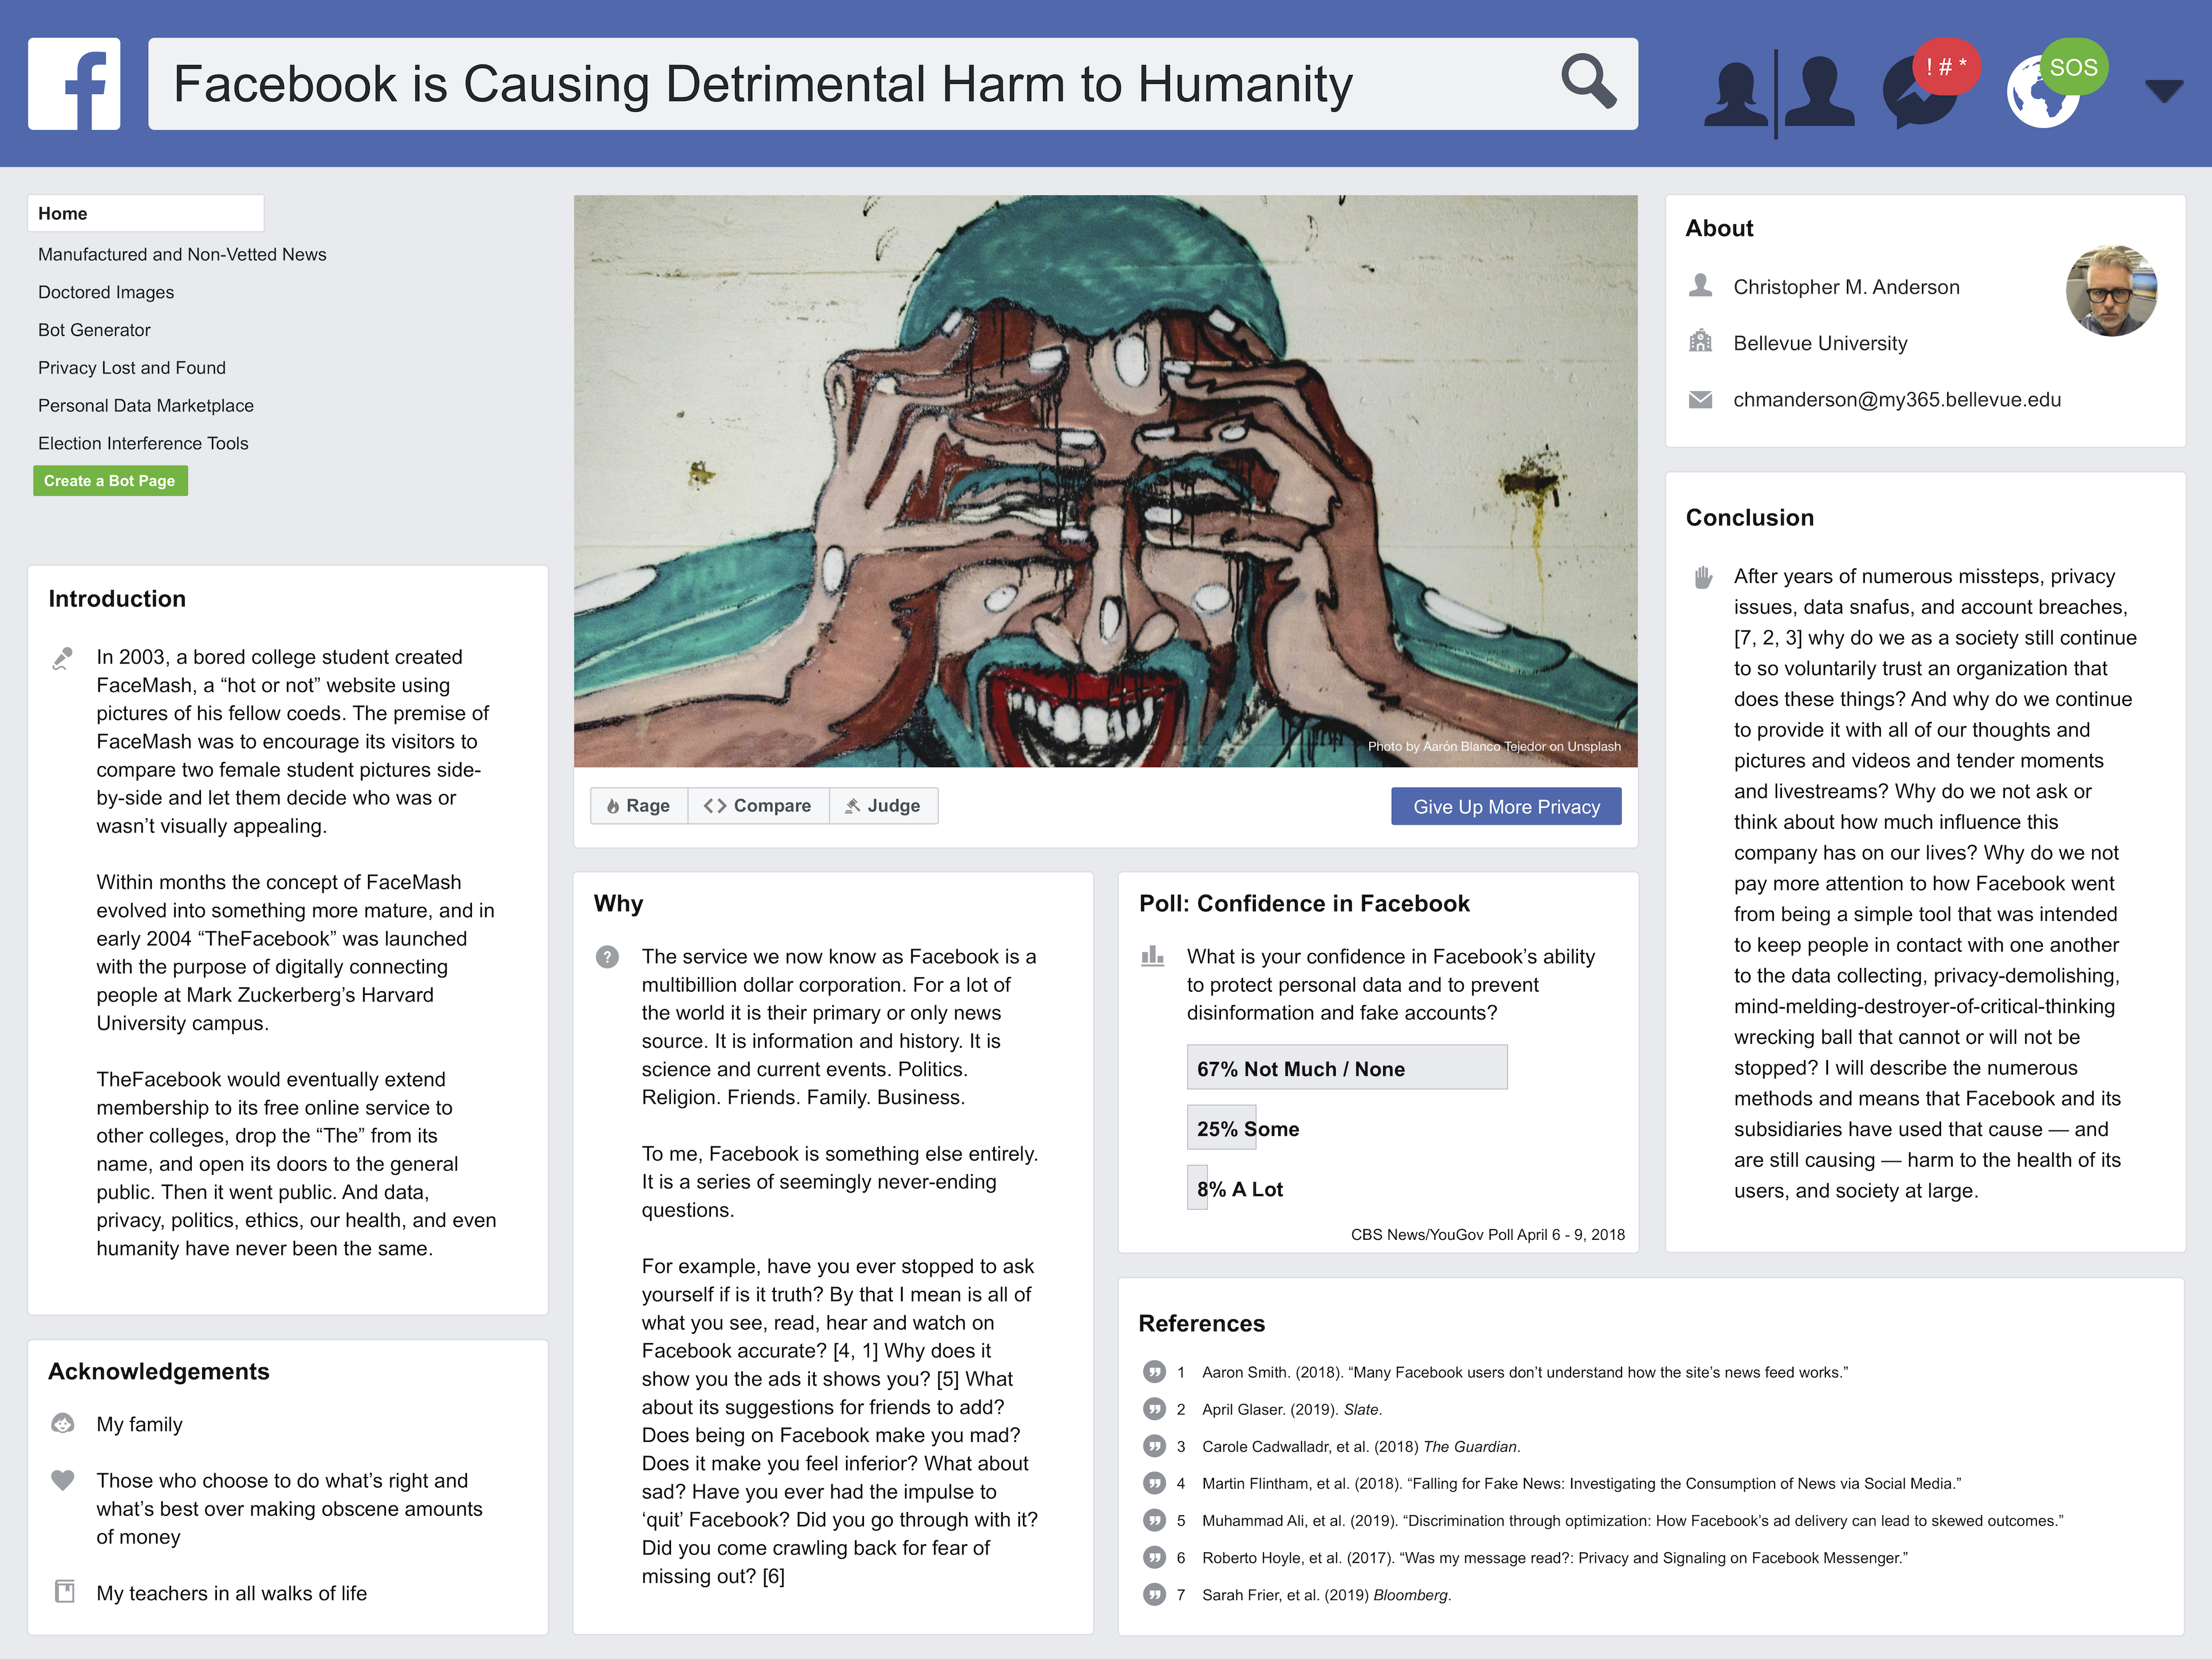 Facebook is Causing Detrimental Harm to Humanity